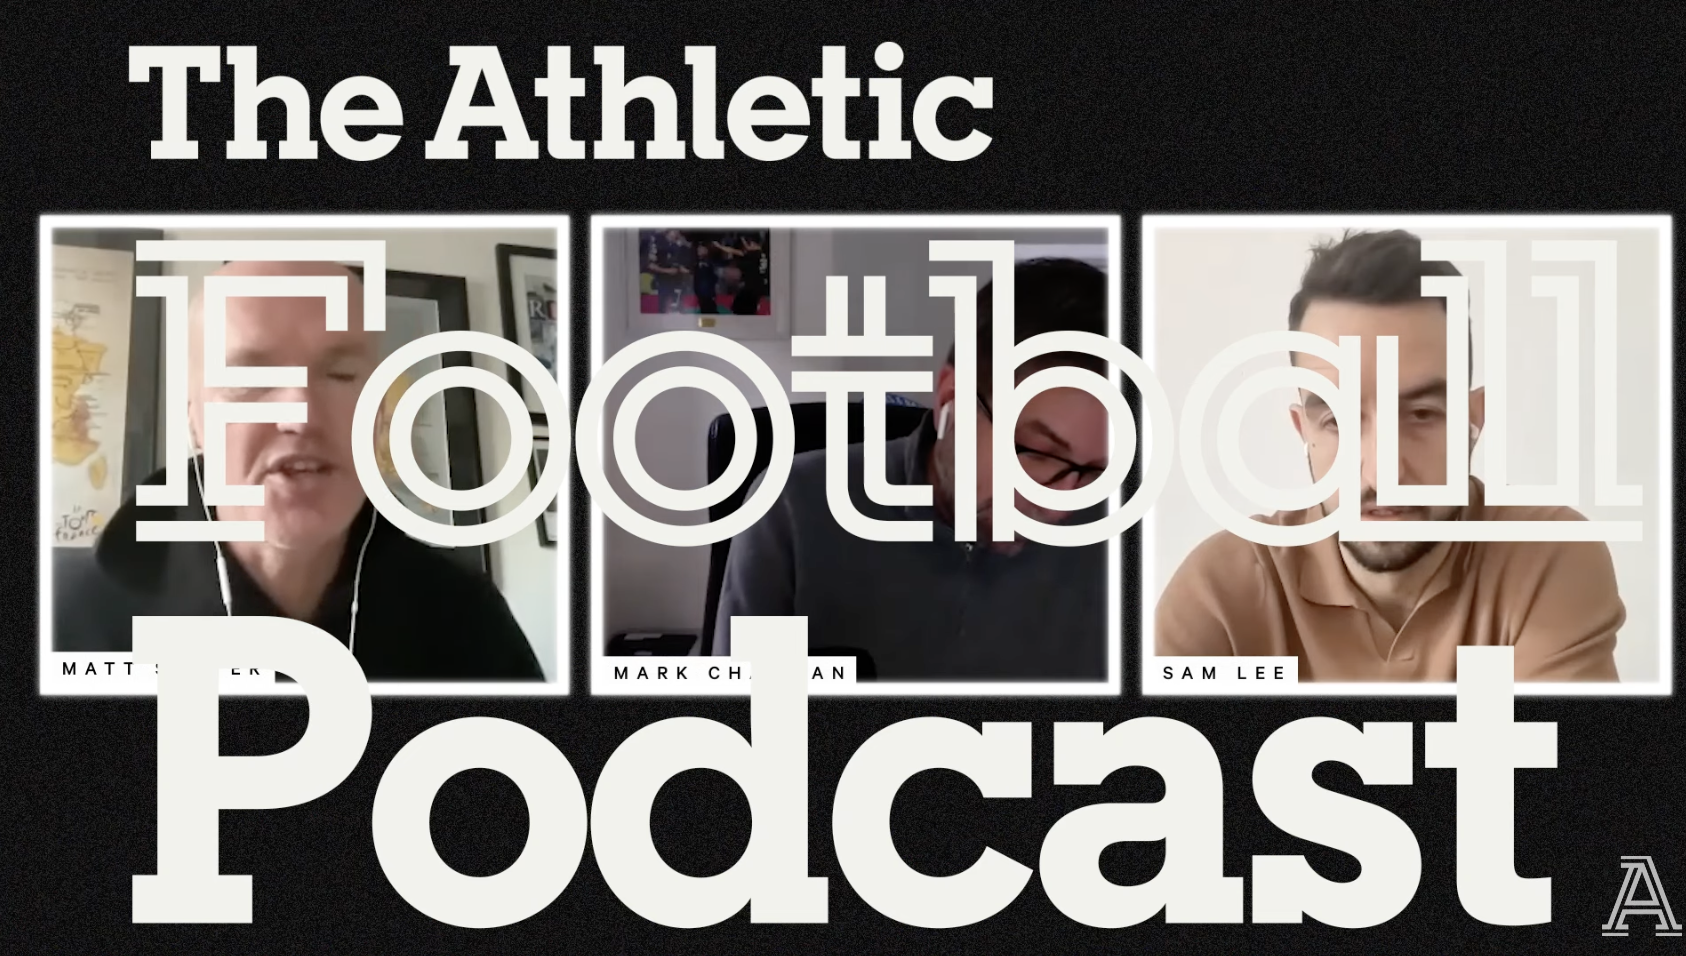 Best Soccer Podcast Streams – The Athletic Football Podcast